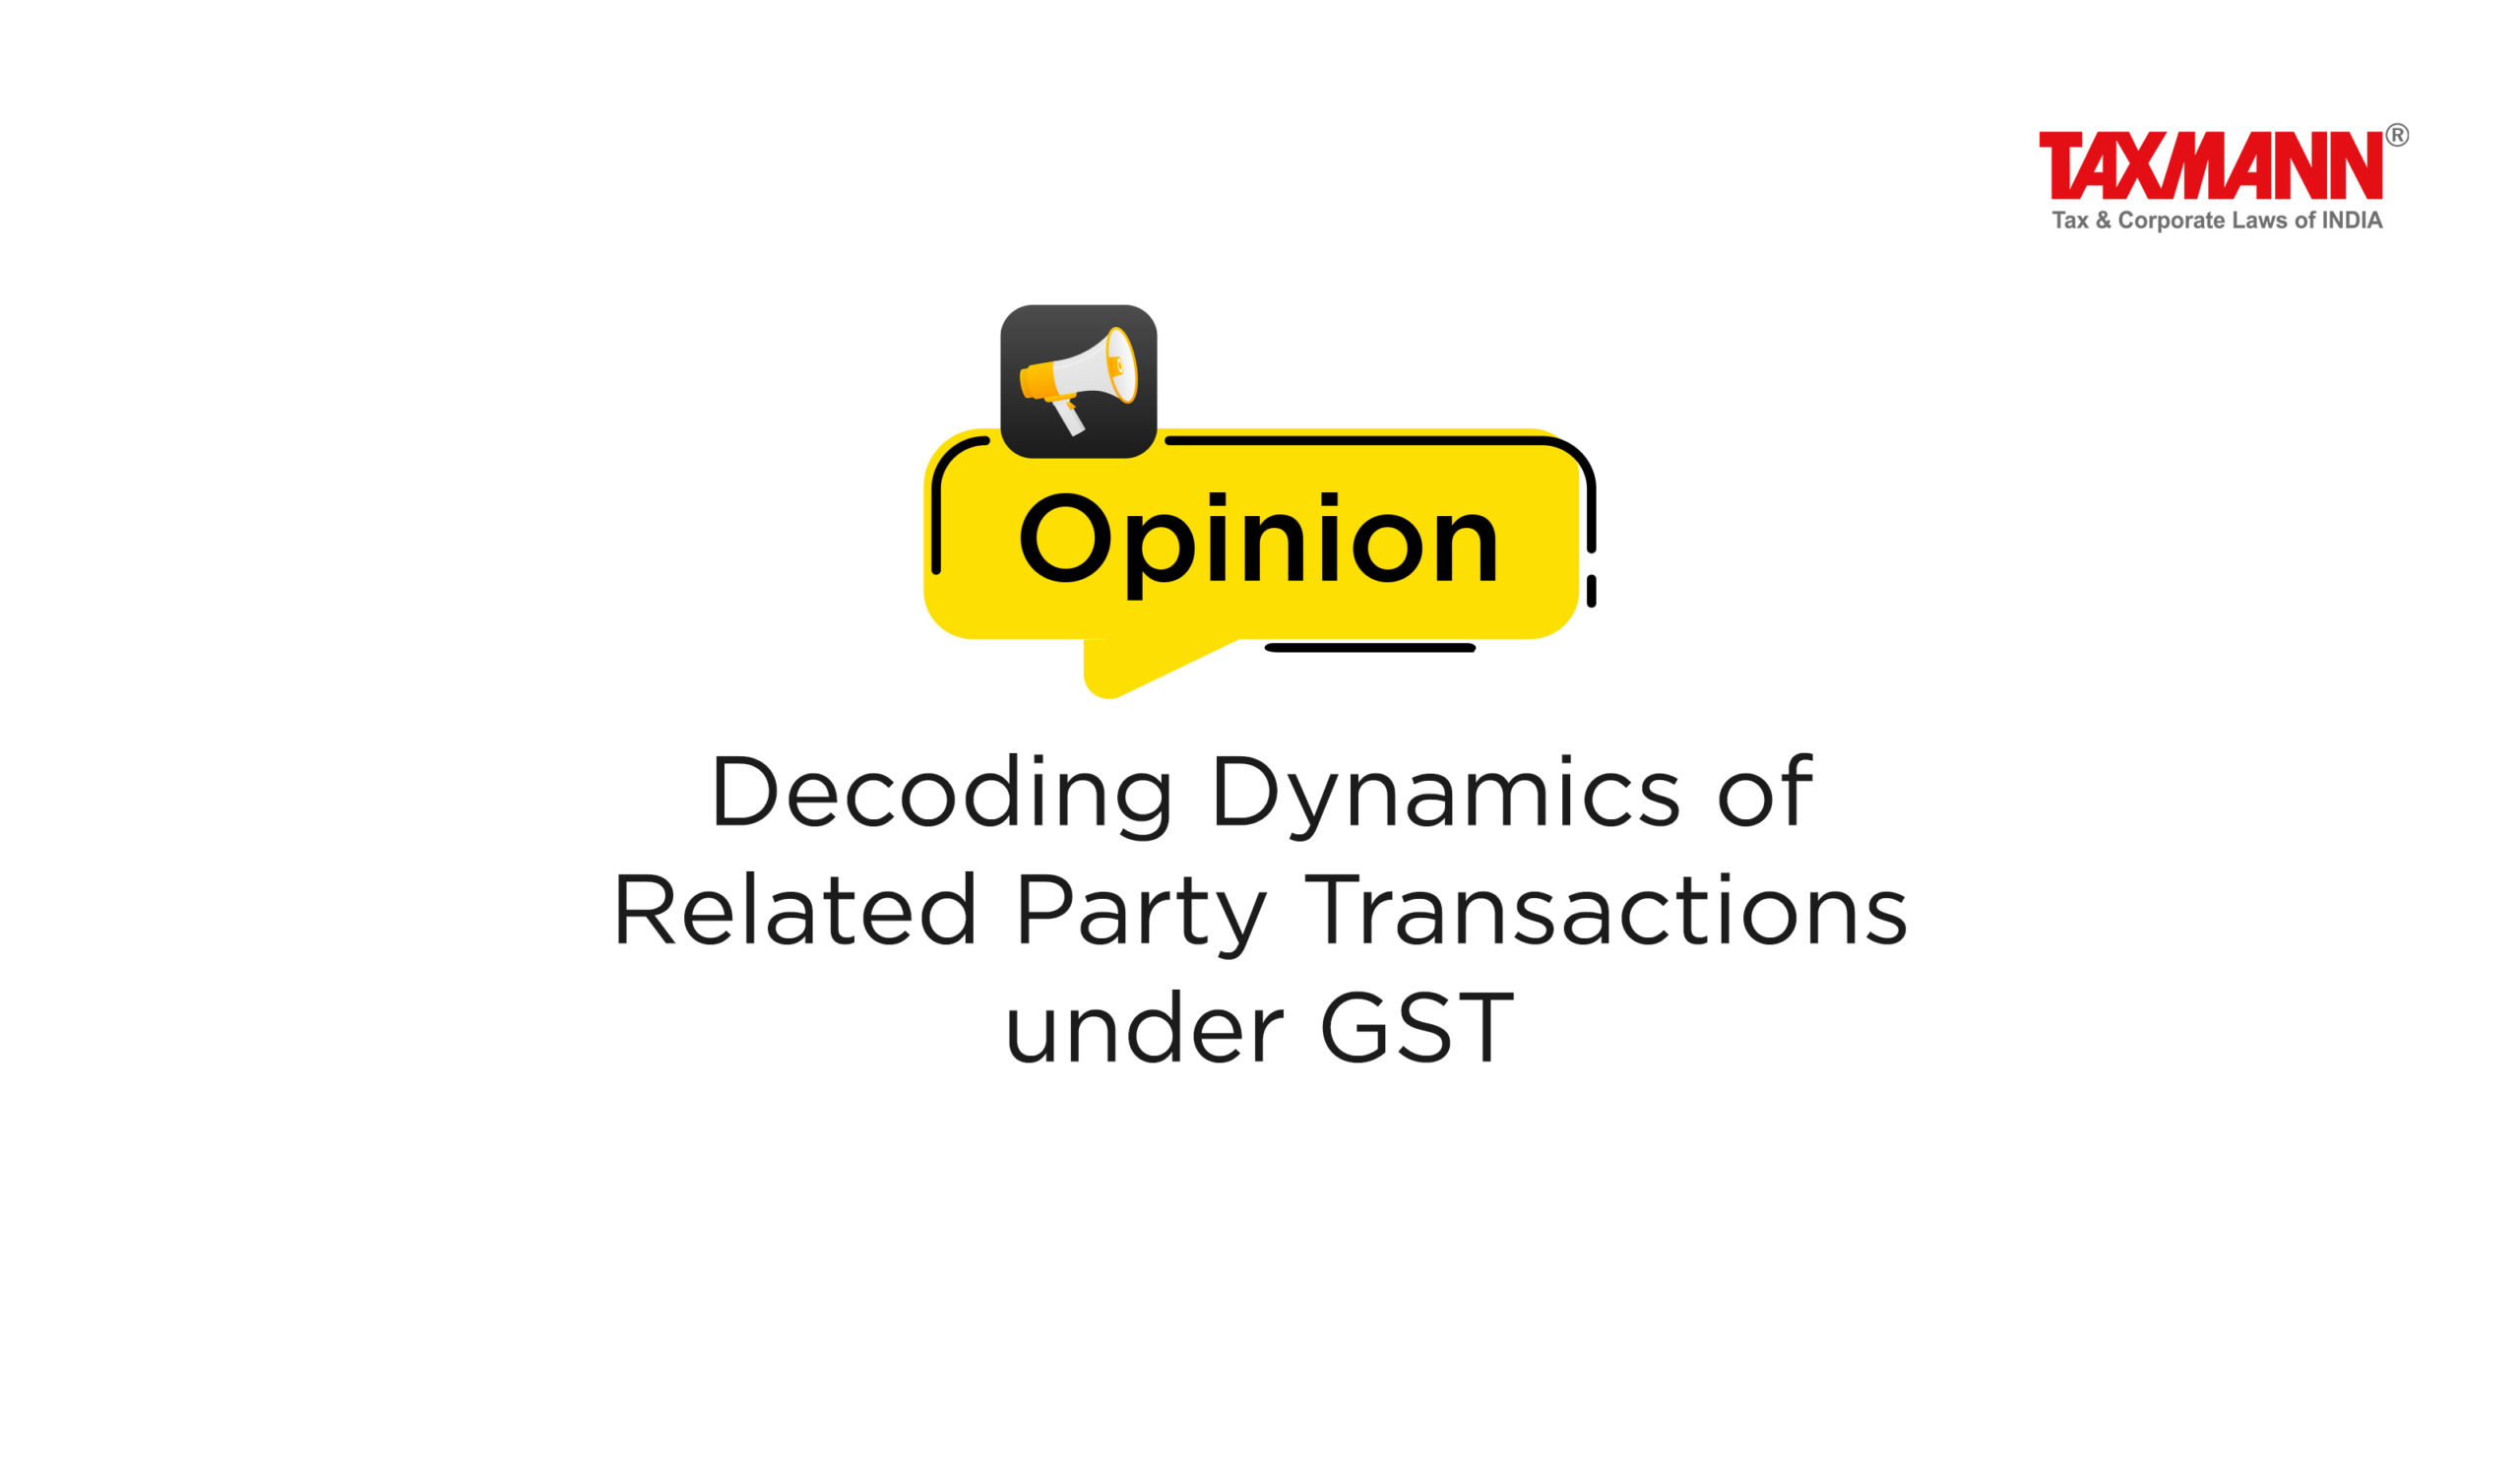 Related Party Transactions under GST